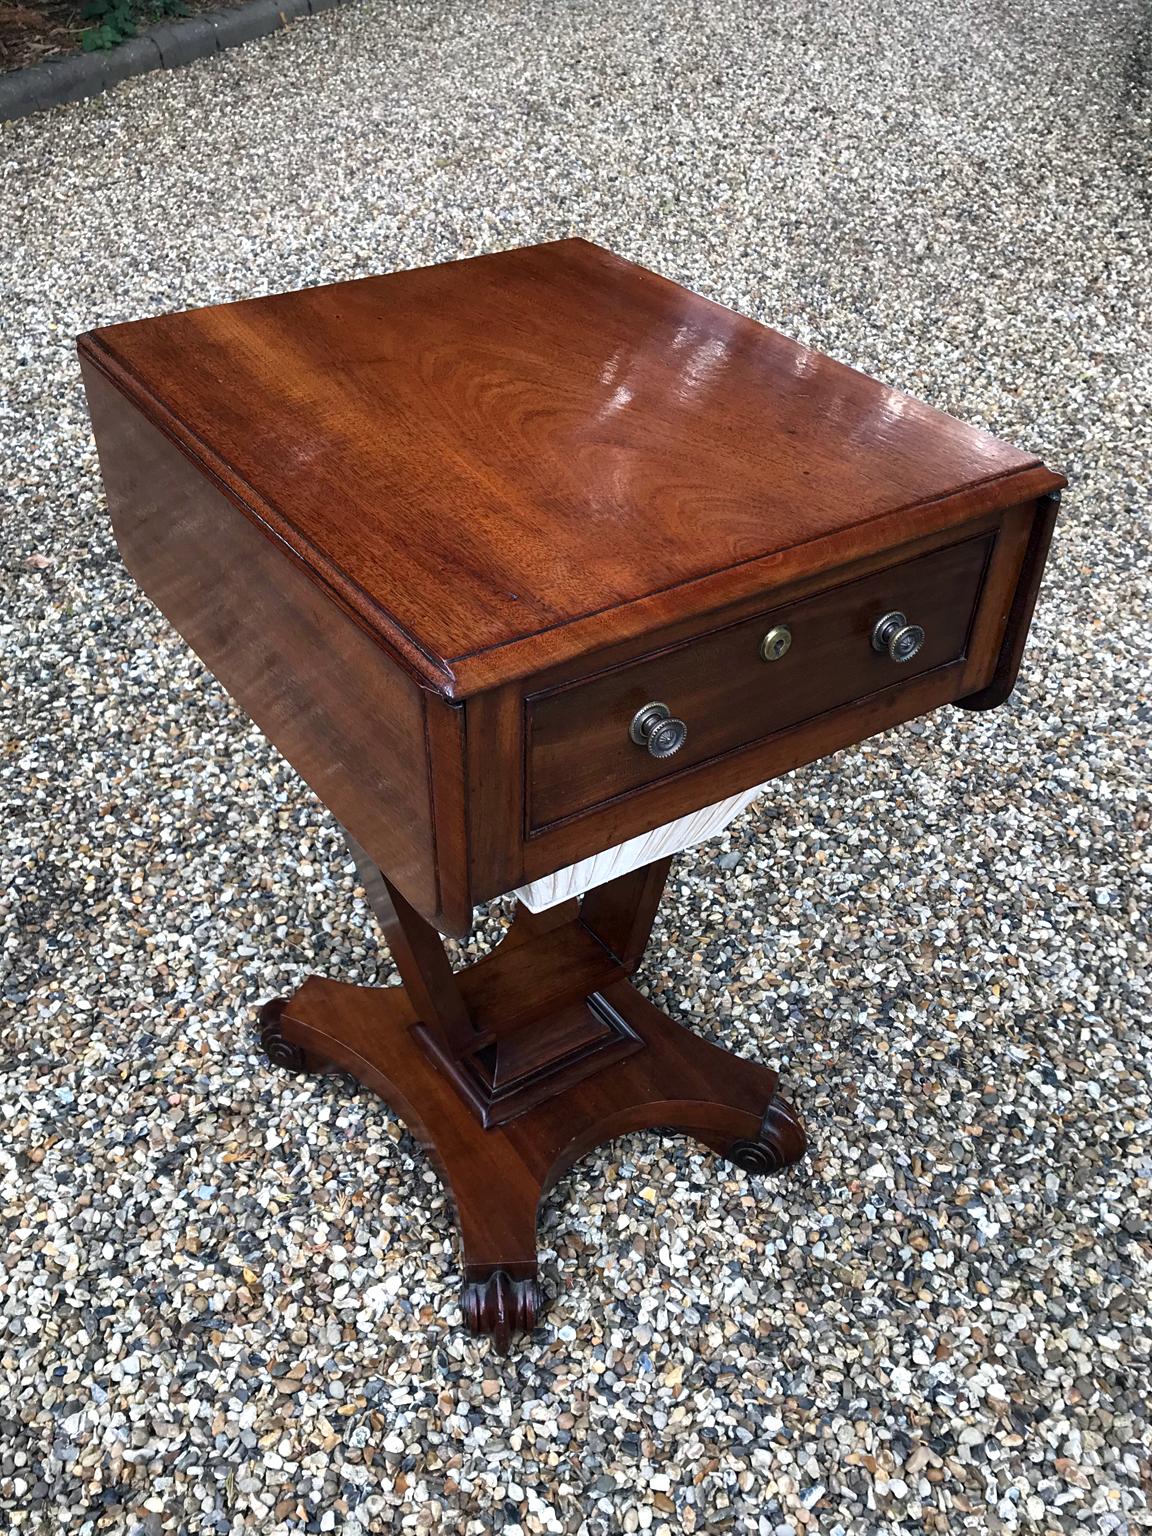 A William IV mahogany drop-leaf work table, fitted with a drawer and well, on a platform base.
circa 1837
Dimensions:
Width 17.5 inches – 44 cms
Width open: 31 inches – 79 cms
Height 28.5 inches – 72 cms
Depth 21 inches – 53 cms.
  